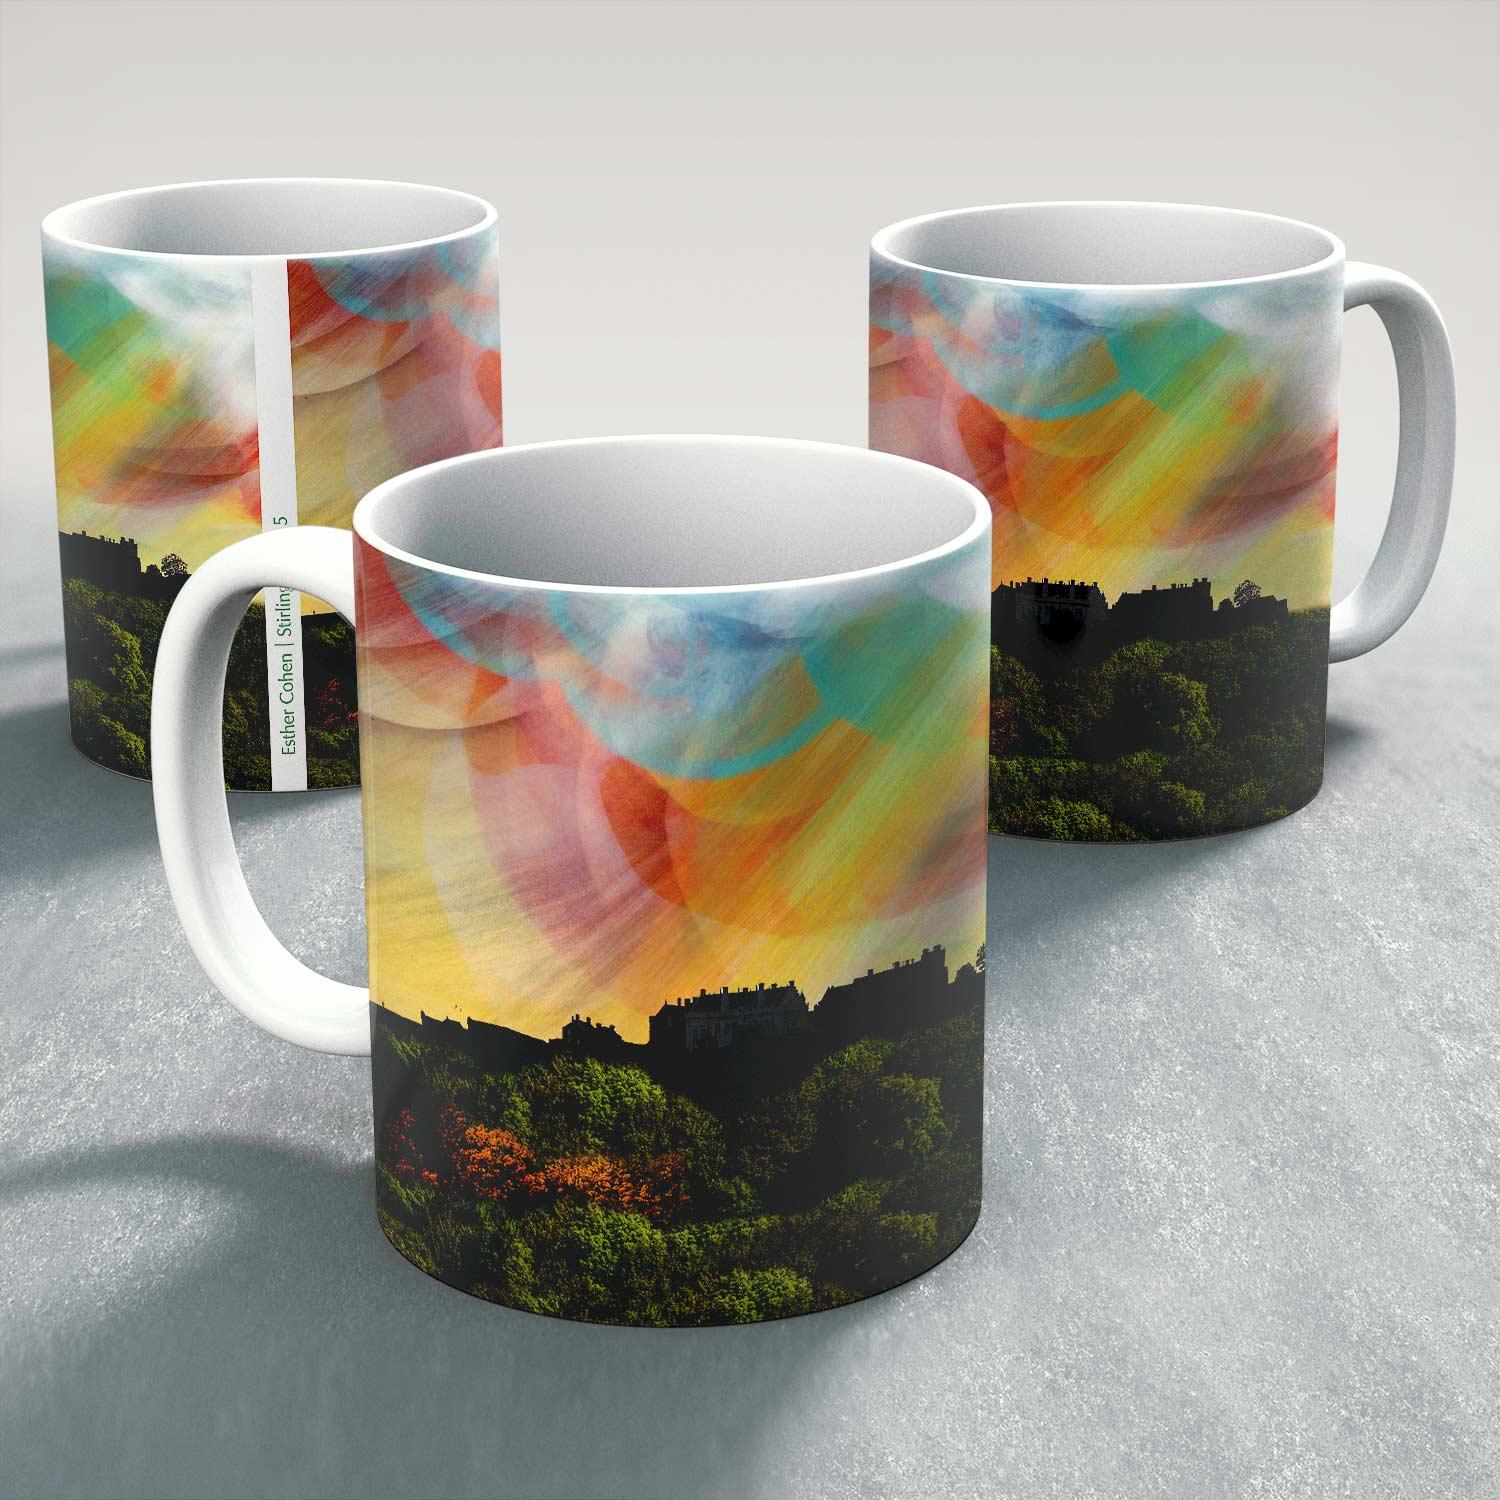 Stirling Castle 5 Mug from an original painting by artist Esther Cohen